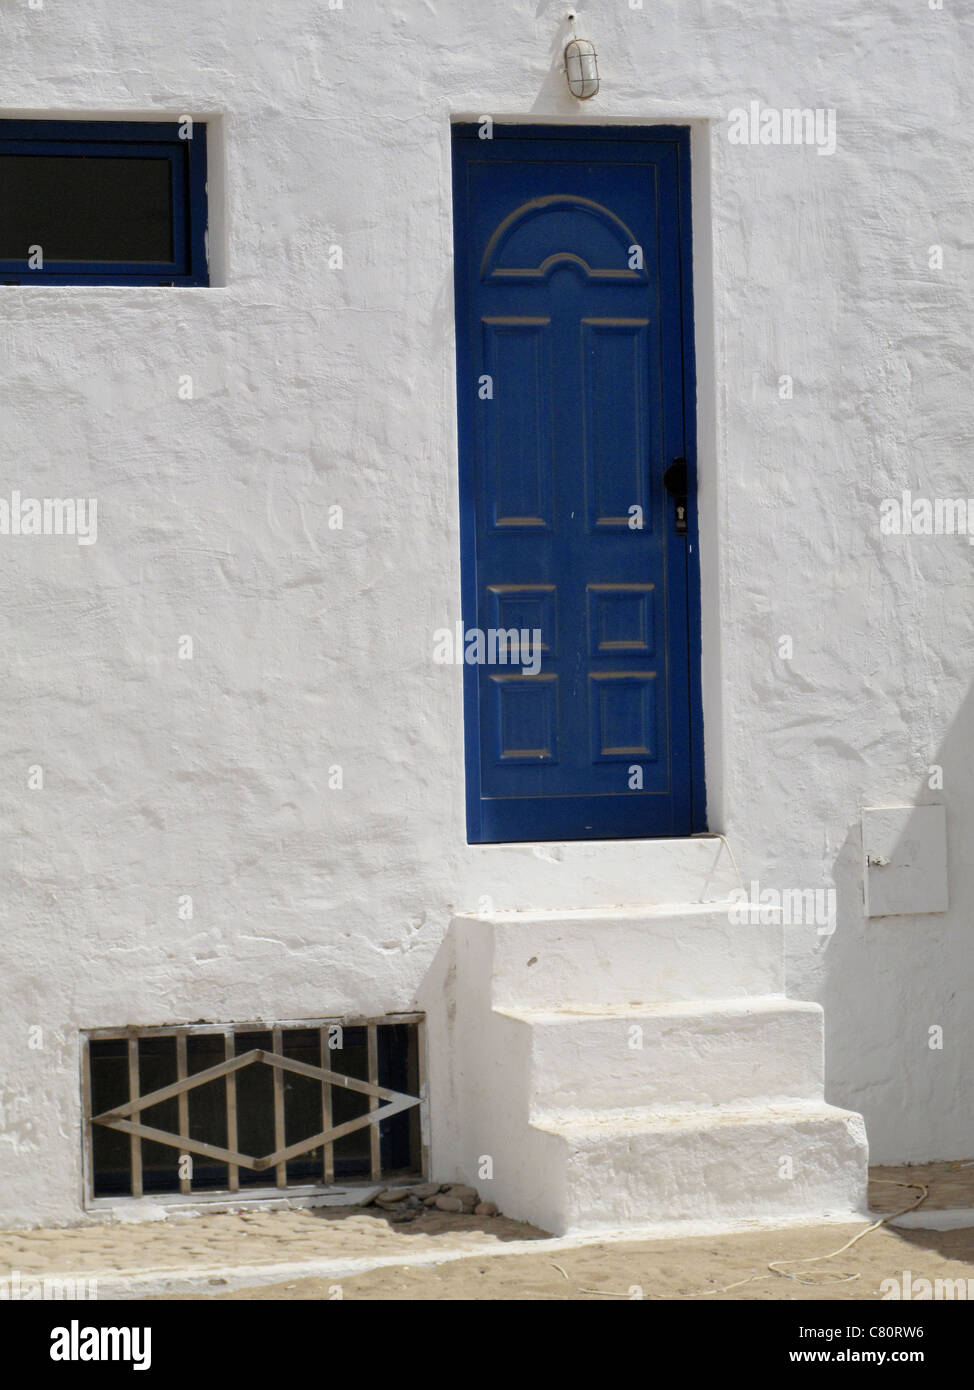 White washed stone building with blue door Stock Photo